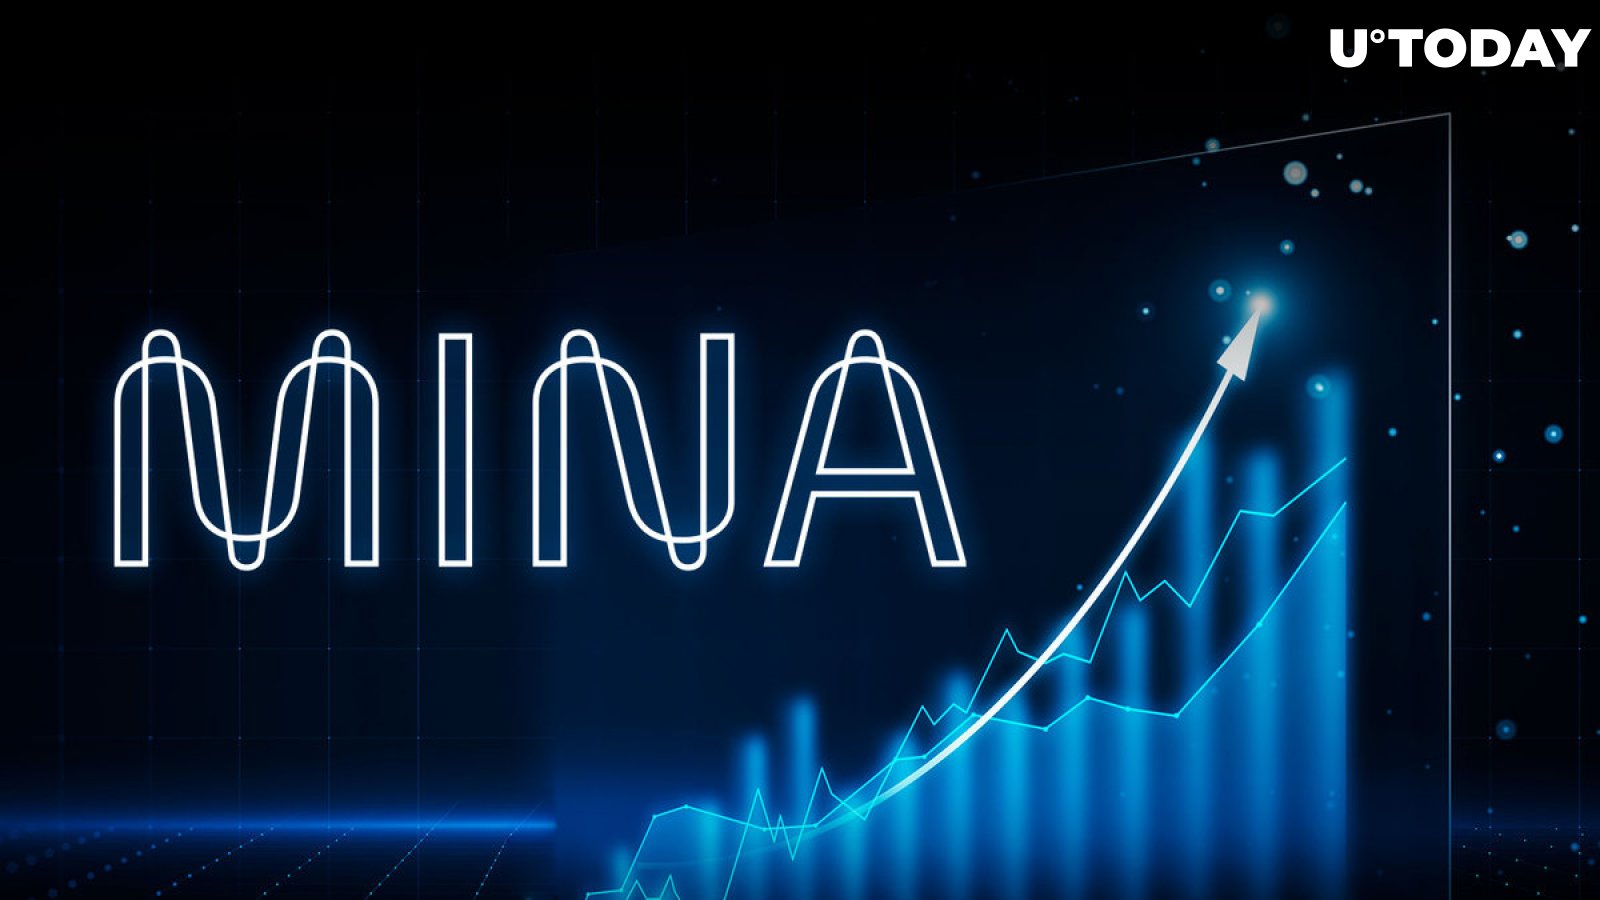 MINA Prints 88% Growth, What Is Behind This Rally?